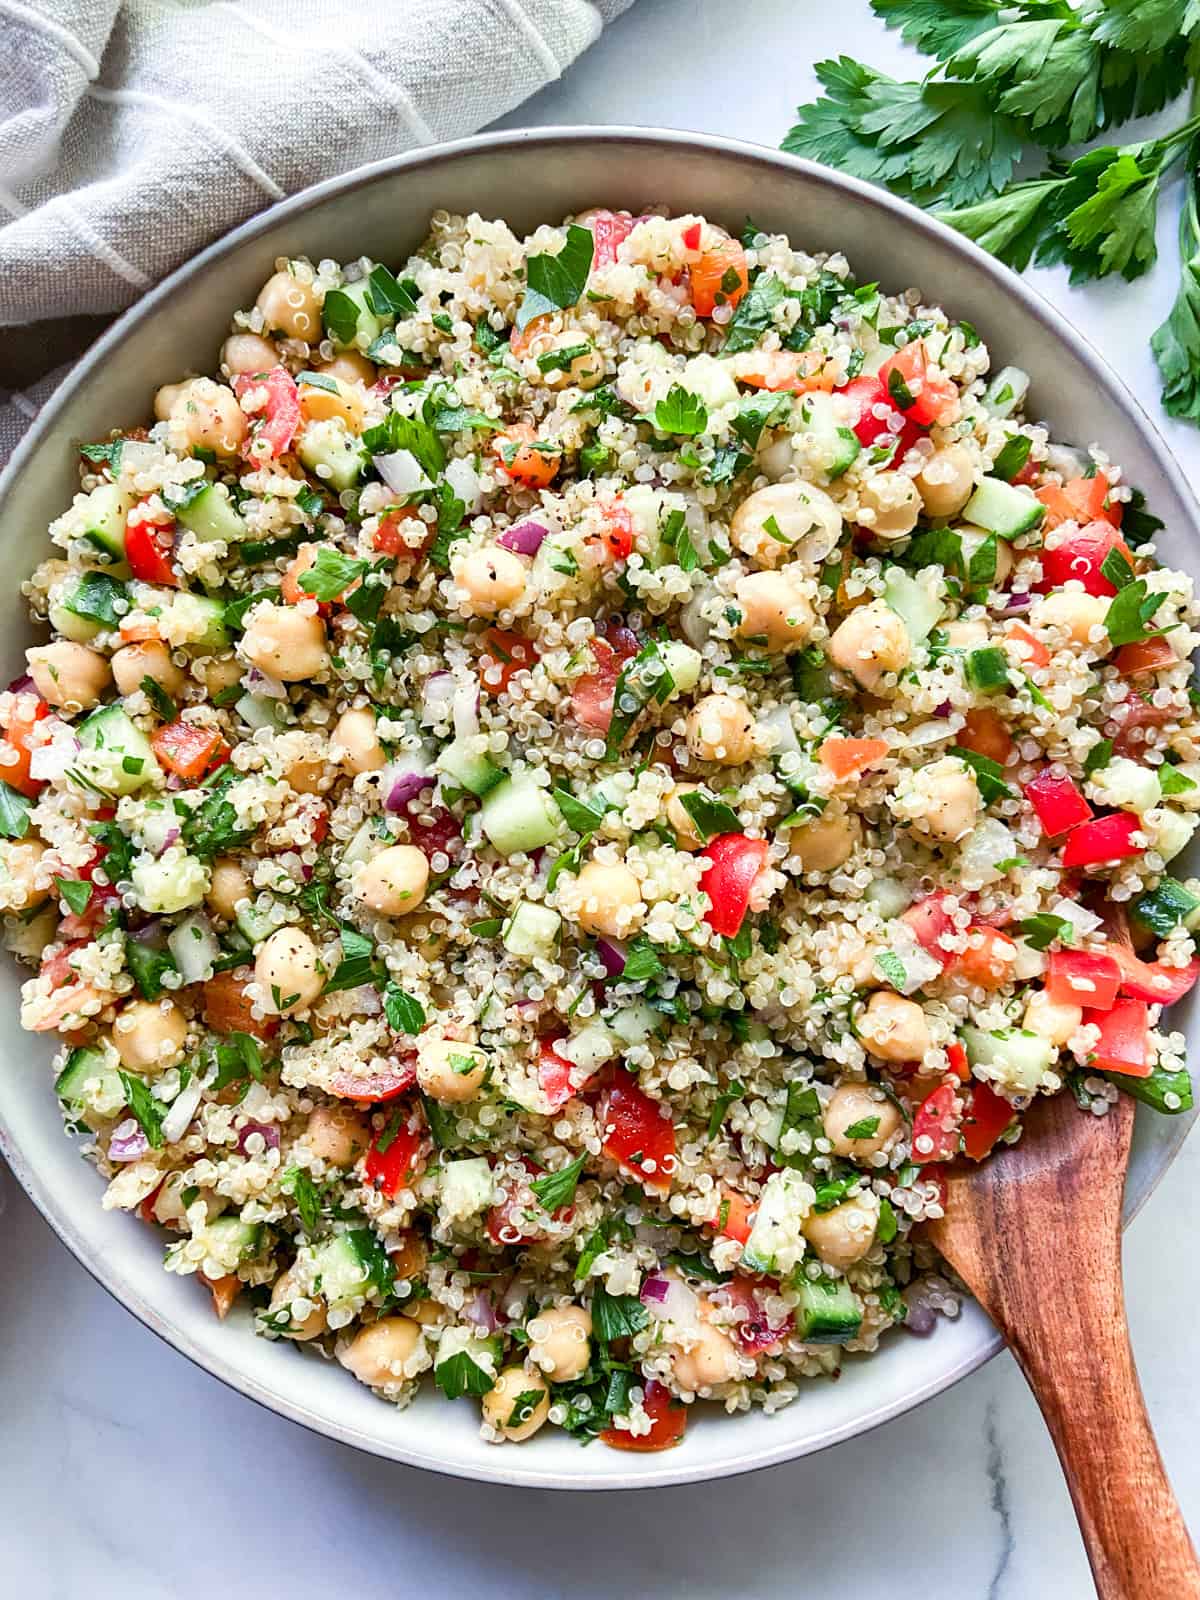 Quinoa salad with chickpeas in a large bowl with a wooden server.